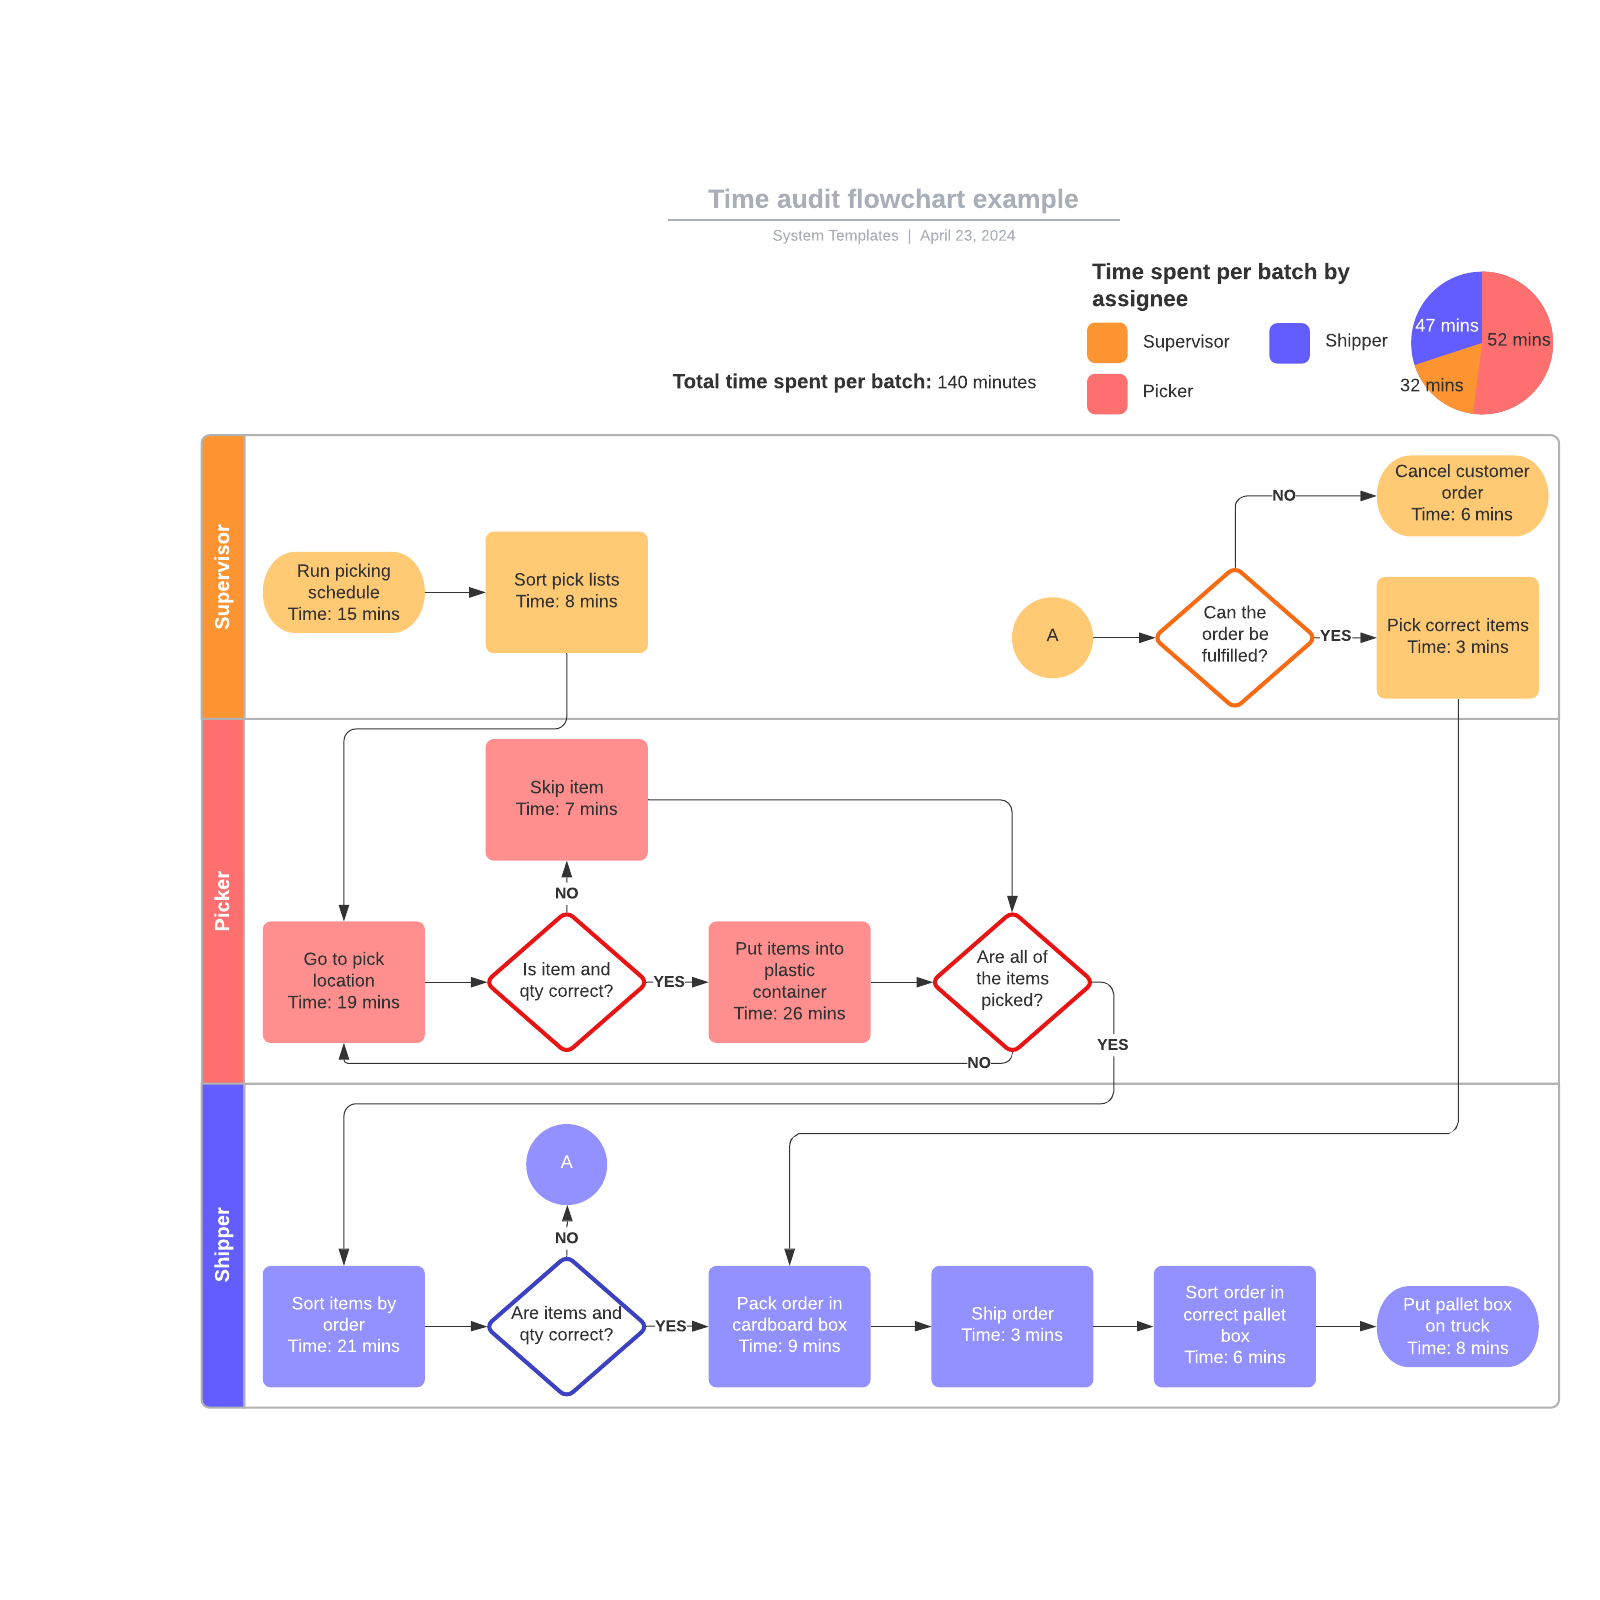 Time audit flowchart example example